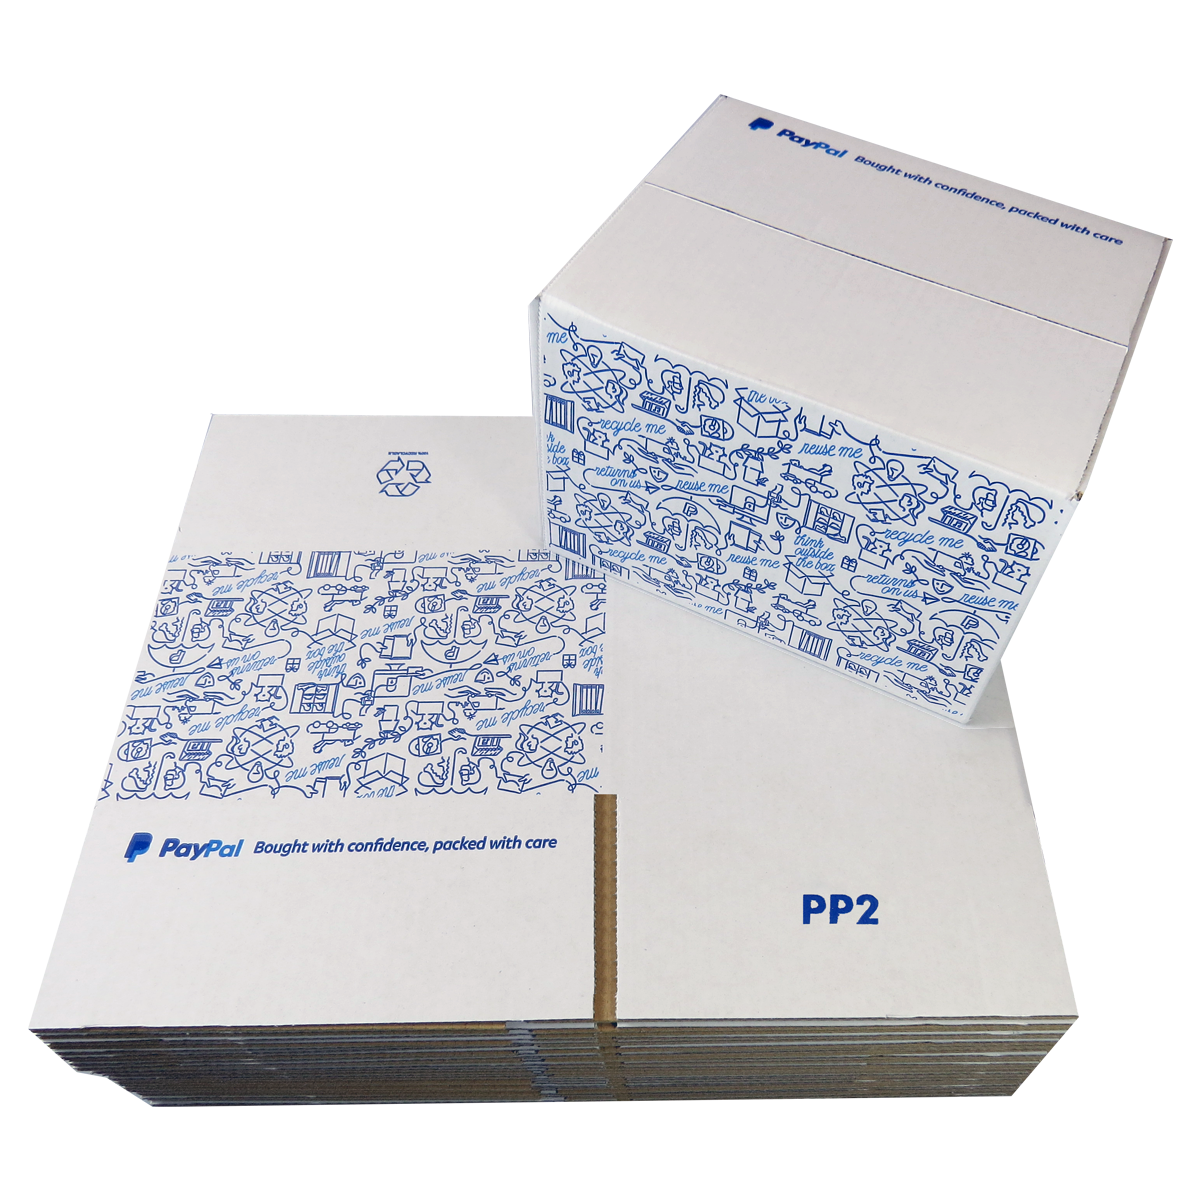 500 x PP2 PayPal Branded Quality White Single Wall Cardboard Postal Mailing Boxes 215x180x135mm